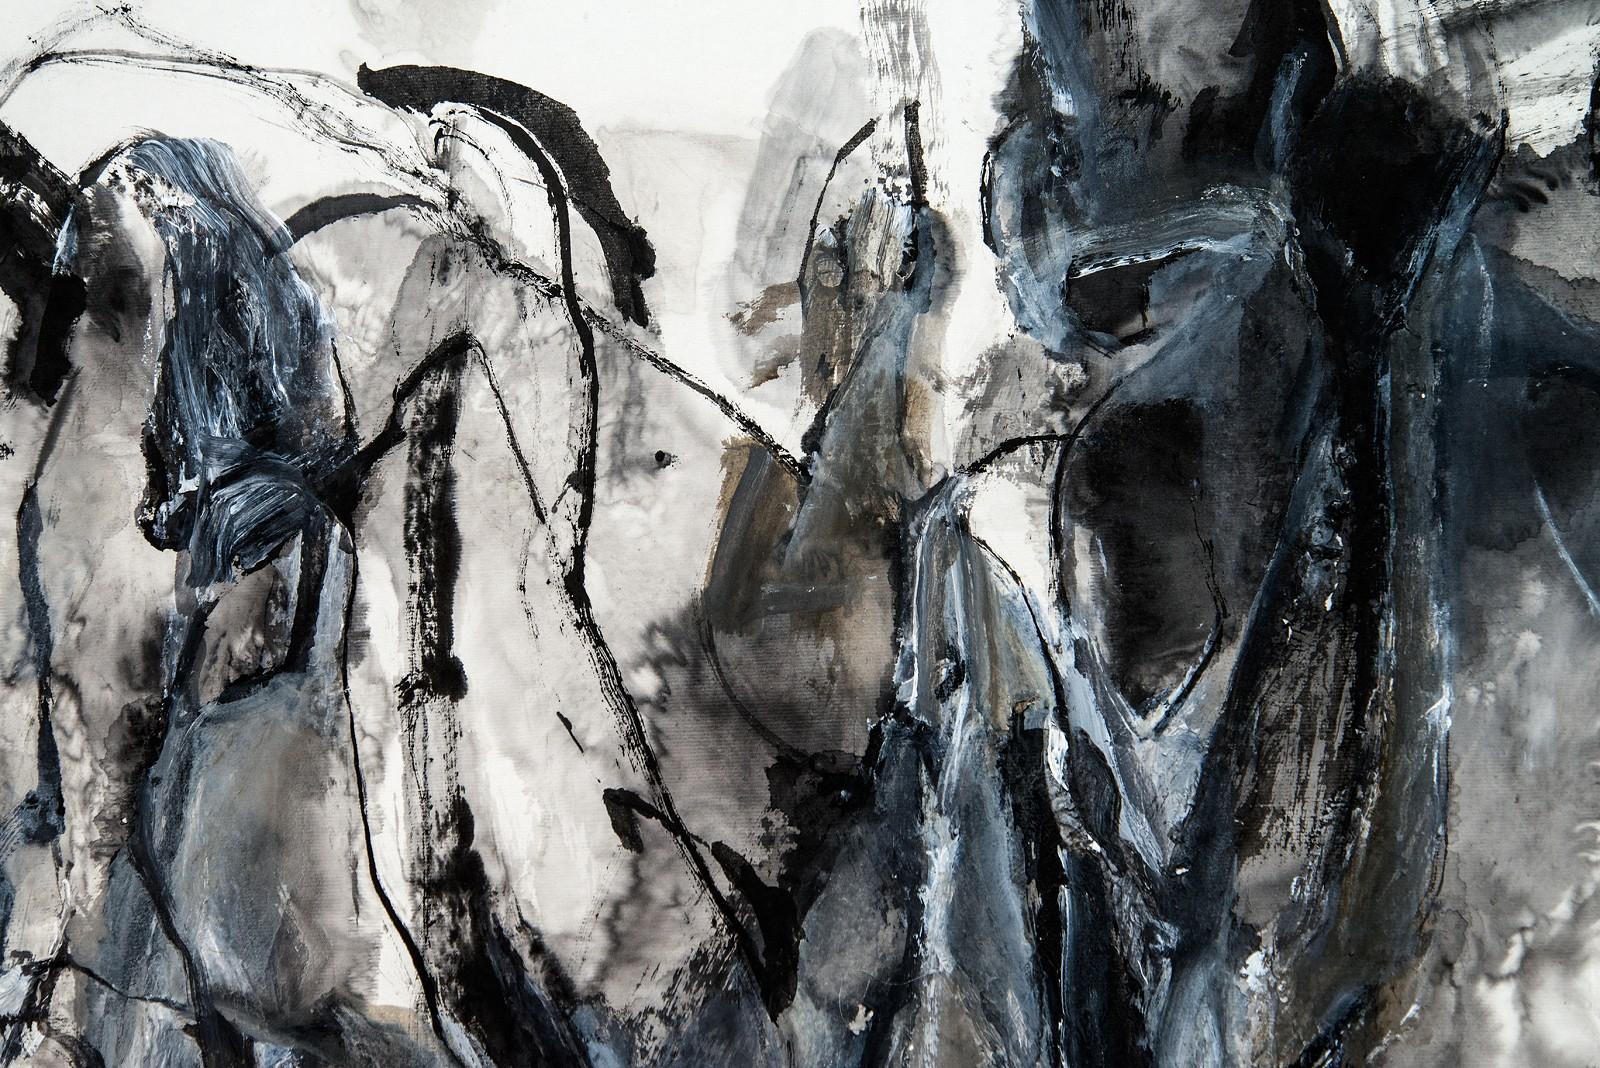 Whiting Timelessness as it is to Time II - noir et blanc, abstrait, acrylique, encre en vente 1